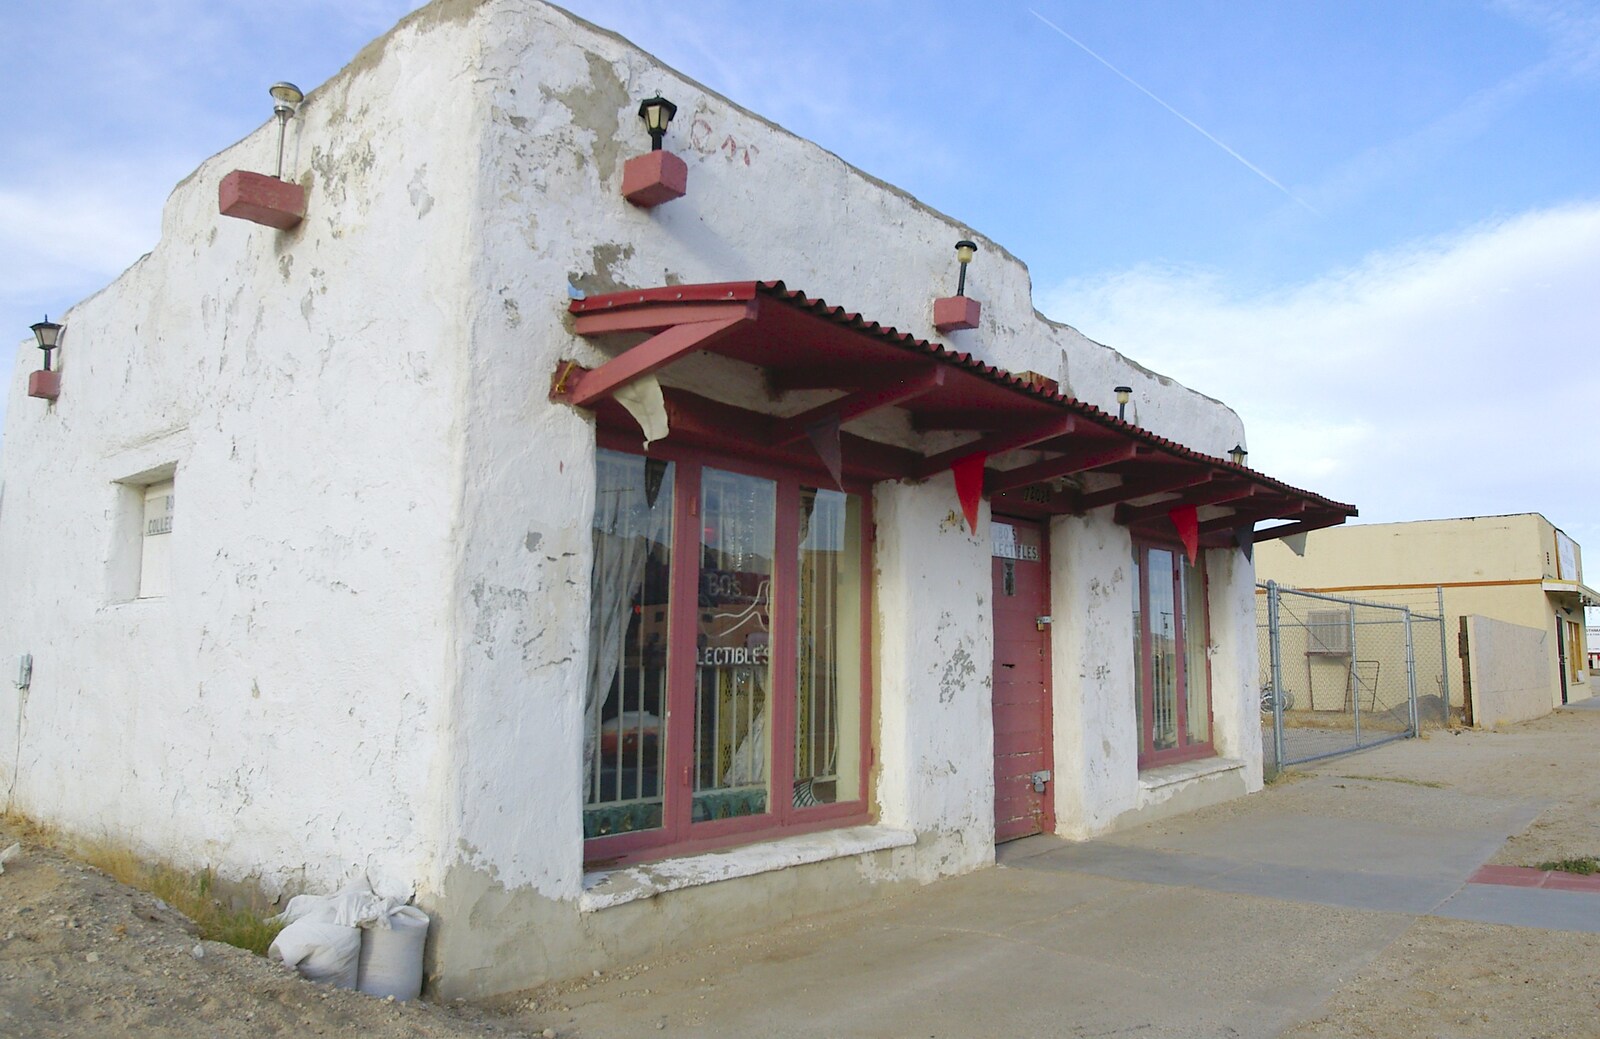 A derelict shop at Yucca Creek from Mojave Desert: San Diego to Joshua Tree and Twentynine Palms, California, US - 5th March 2006